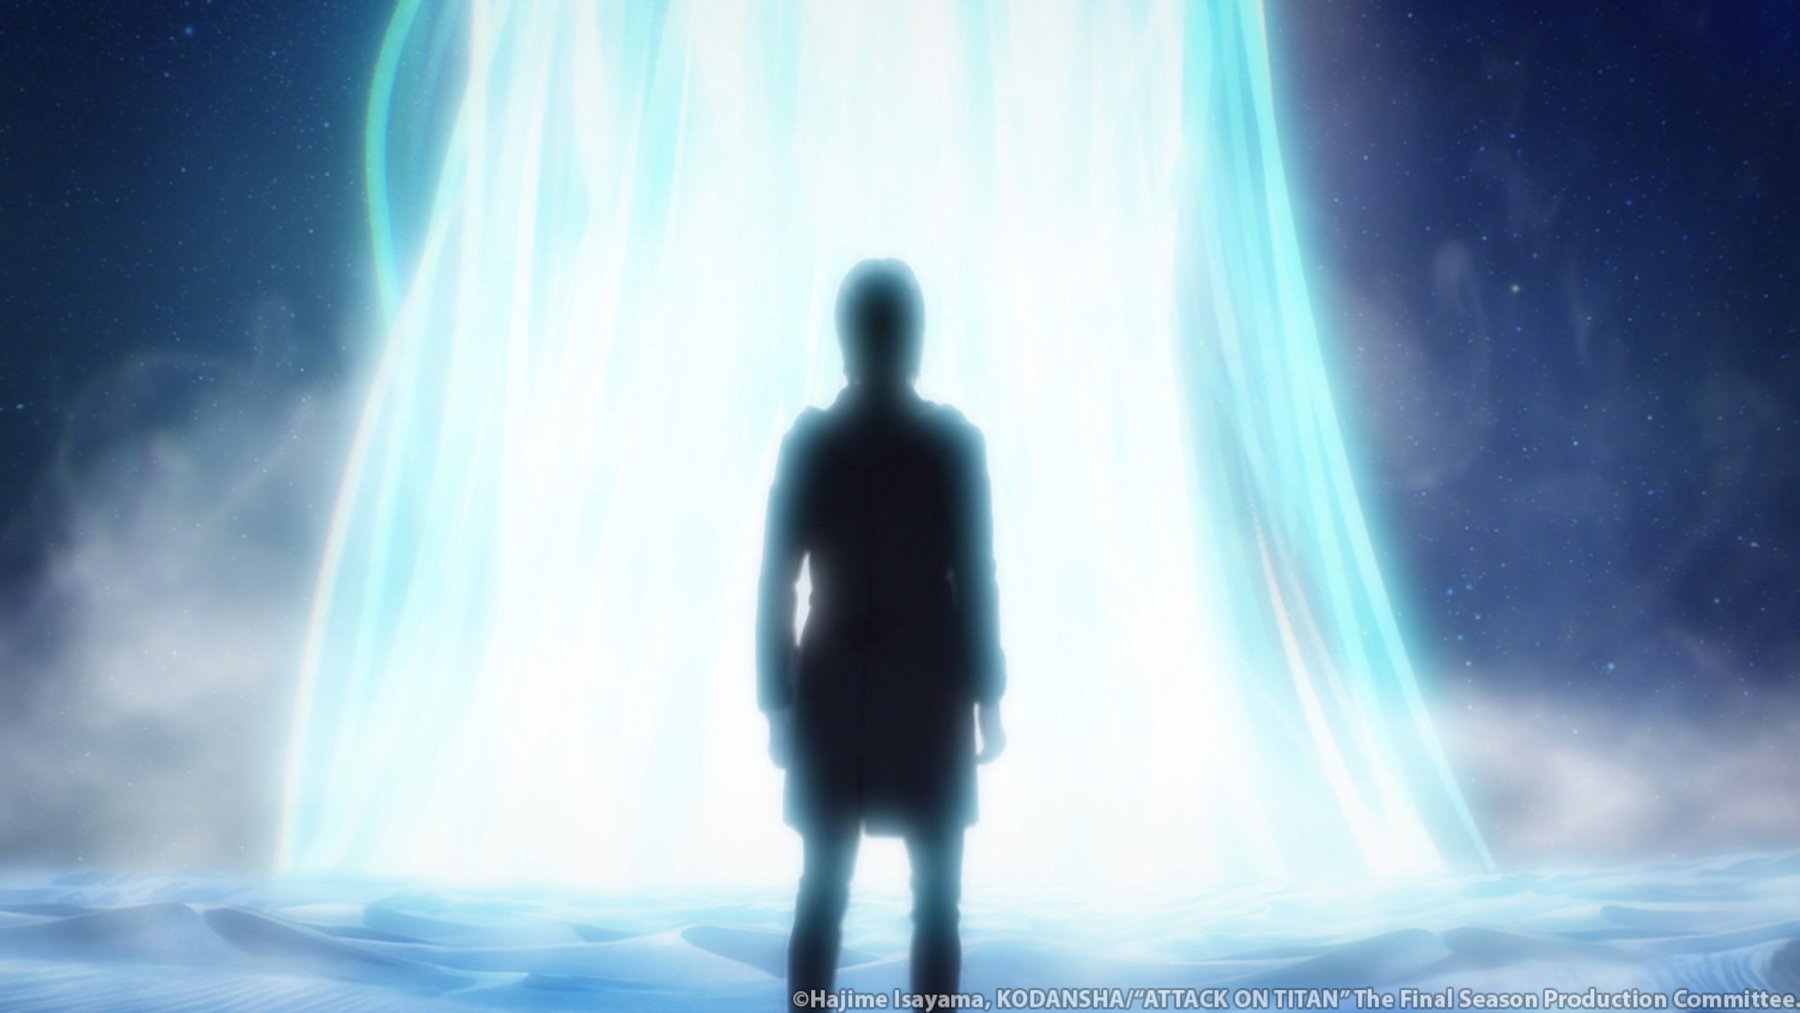 Eren Jaeger in the Paths in 'Attack on Titan' Season 4. He goes there to meet Zeke and Ymir. His silhouette stands in front of a bright blue beam of light.